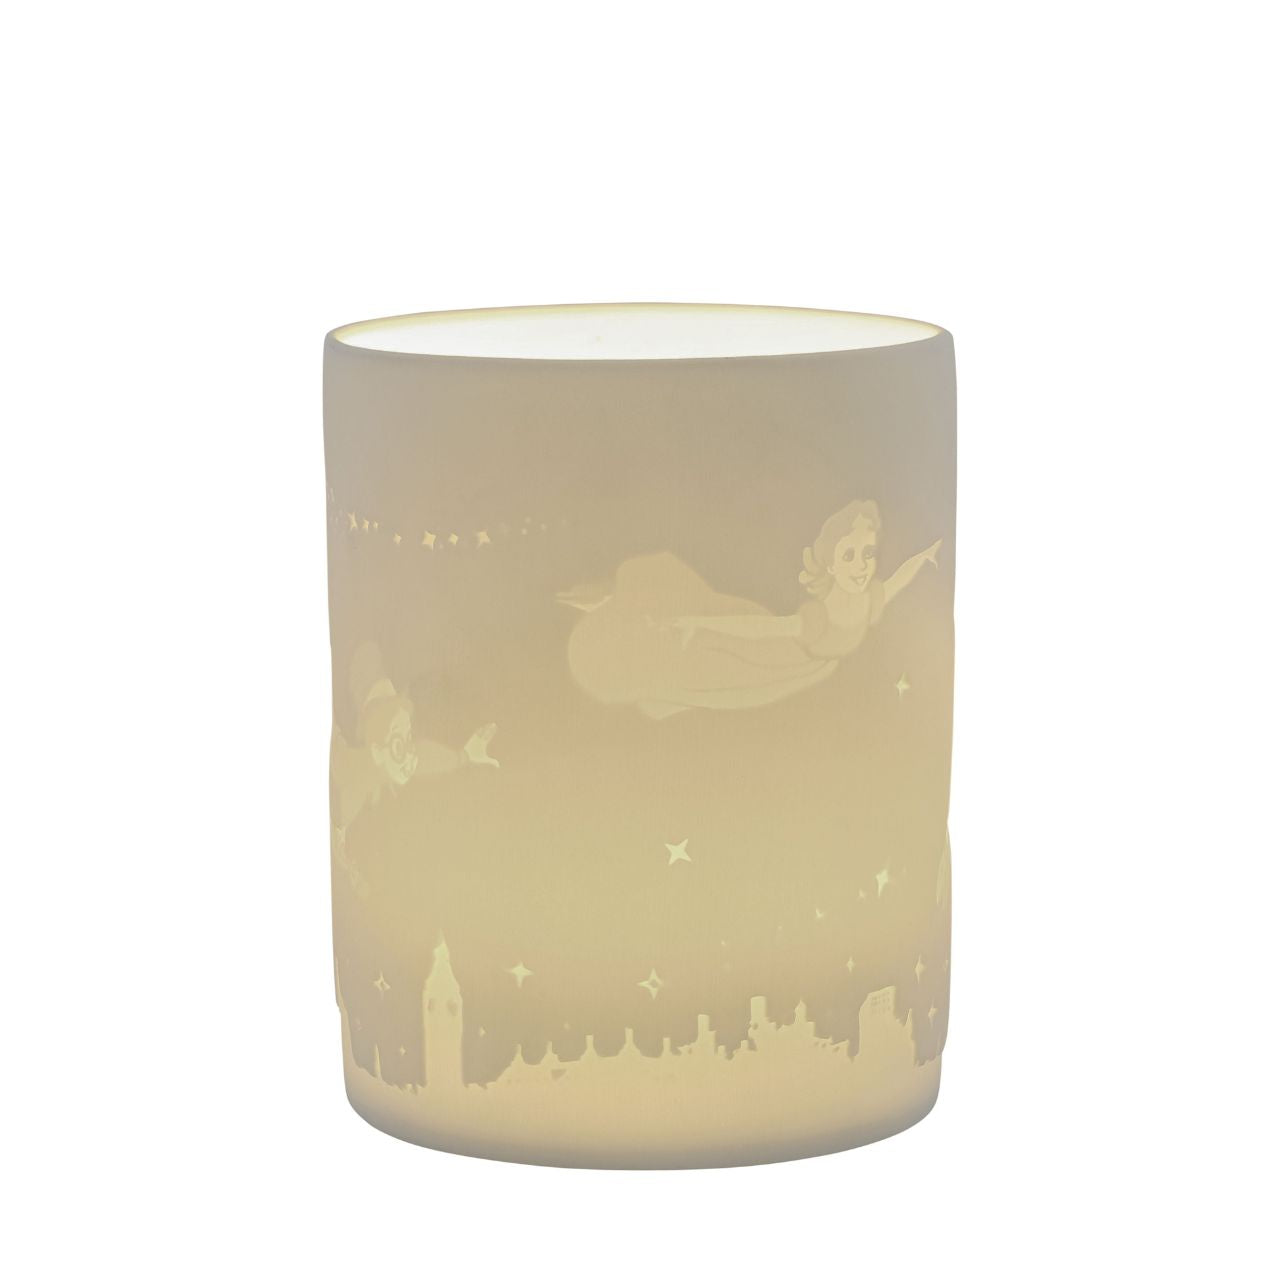 Disney Peter Pan Tea Light Holder Never Land's Waiting  Celebrate Peter Pan's 70th anniversary in 2023 with this one of a kind Disney porcelain tea light holder. Leave the world behind and bid your cares goodbye when you see Peter Pan, Tinker Bell, Wendy, John and Michael flicker around your room when you light the LED candle. The Peter Pan characters are etched into the thin translucent porcelain radiating a warm night light.